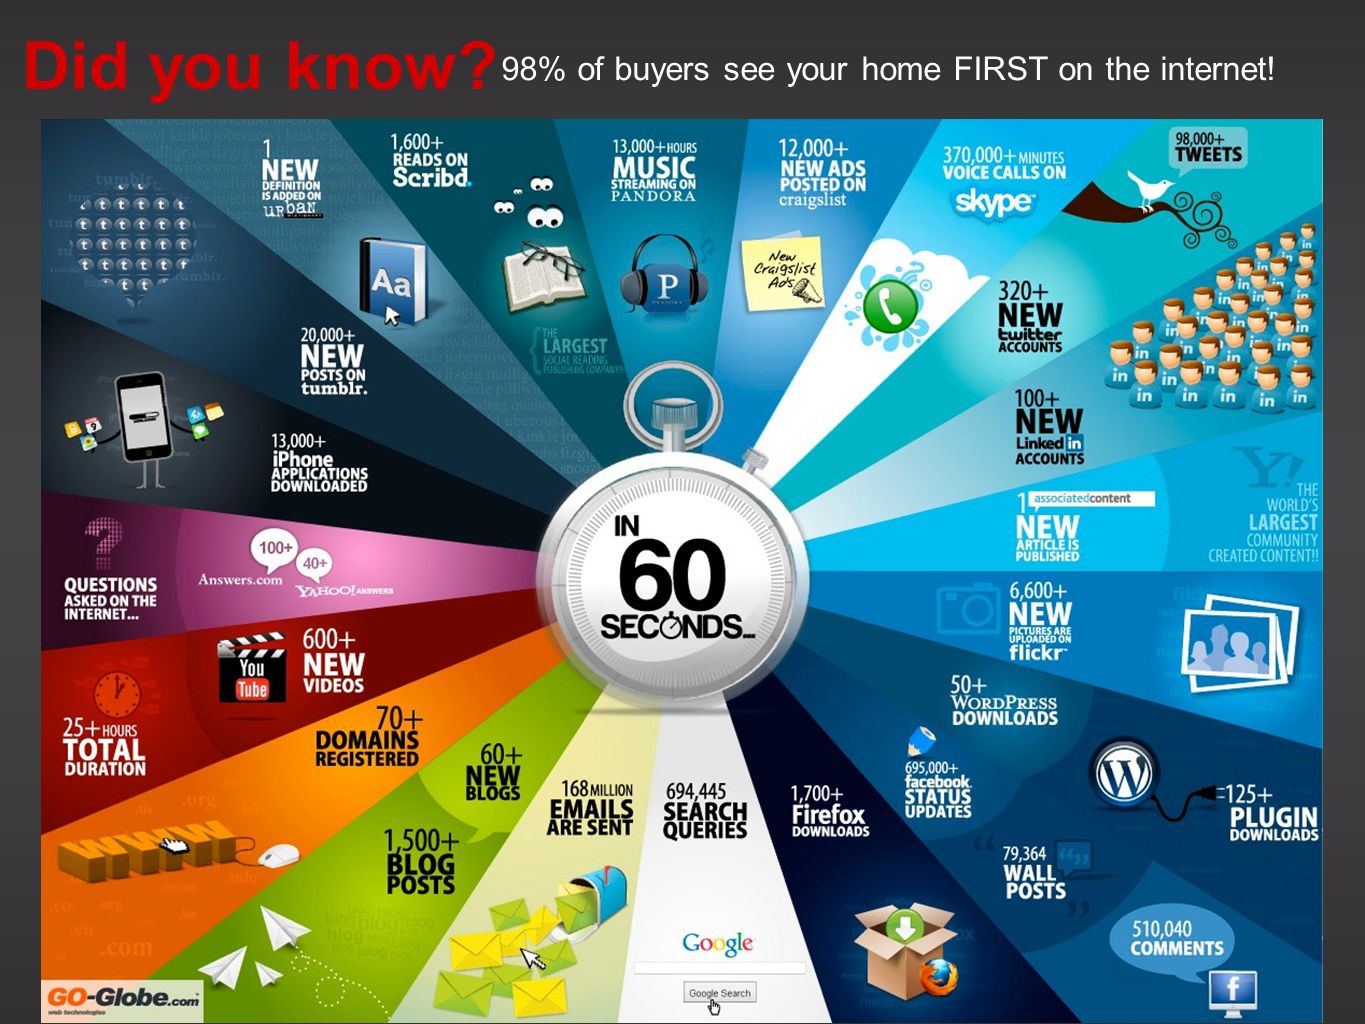 Did you know 98% of buyers see your home FIRST on the internet!